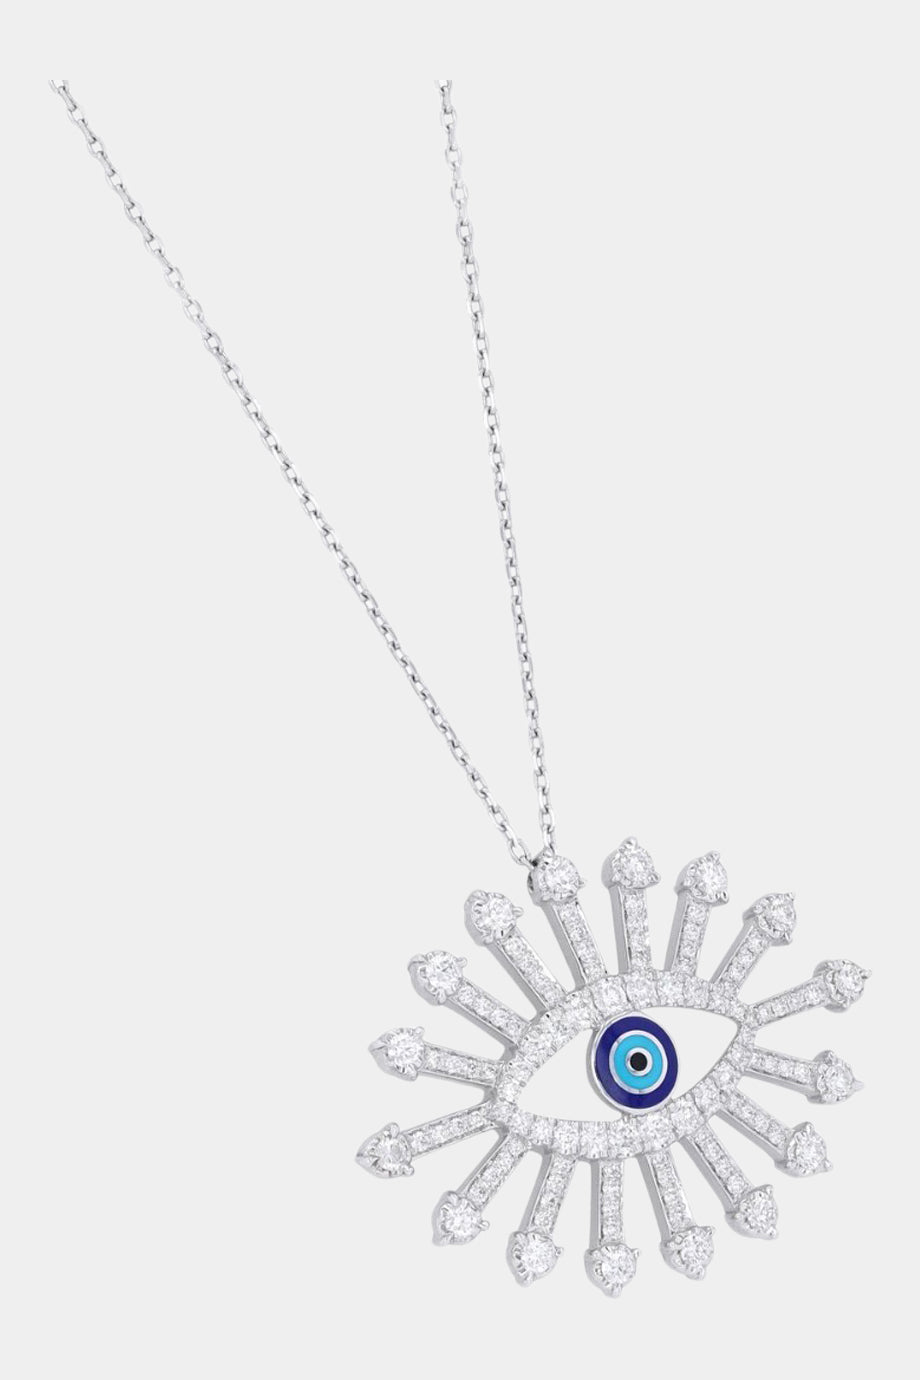 Crazy Eye White Gold And Diamonds Necklace